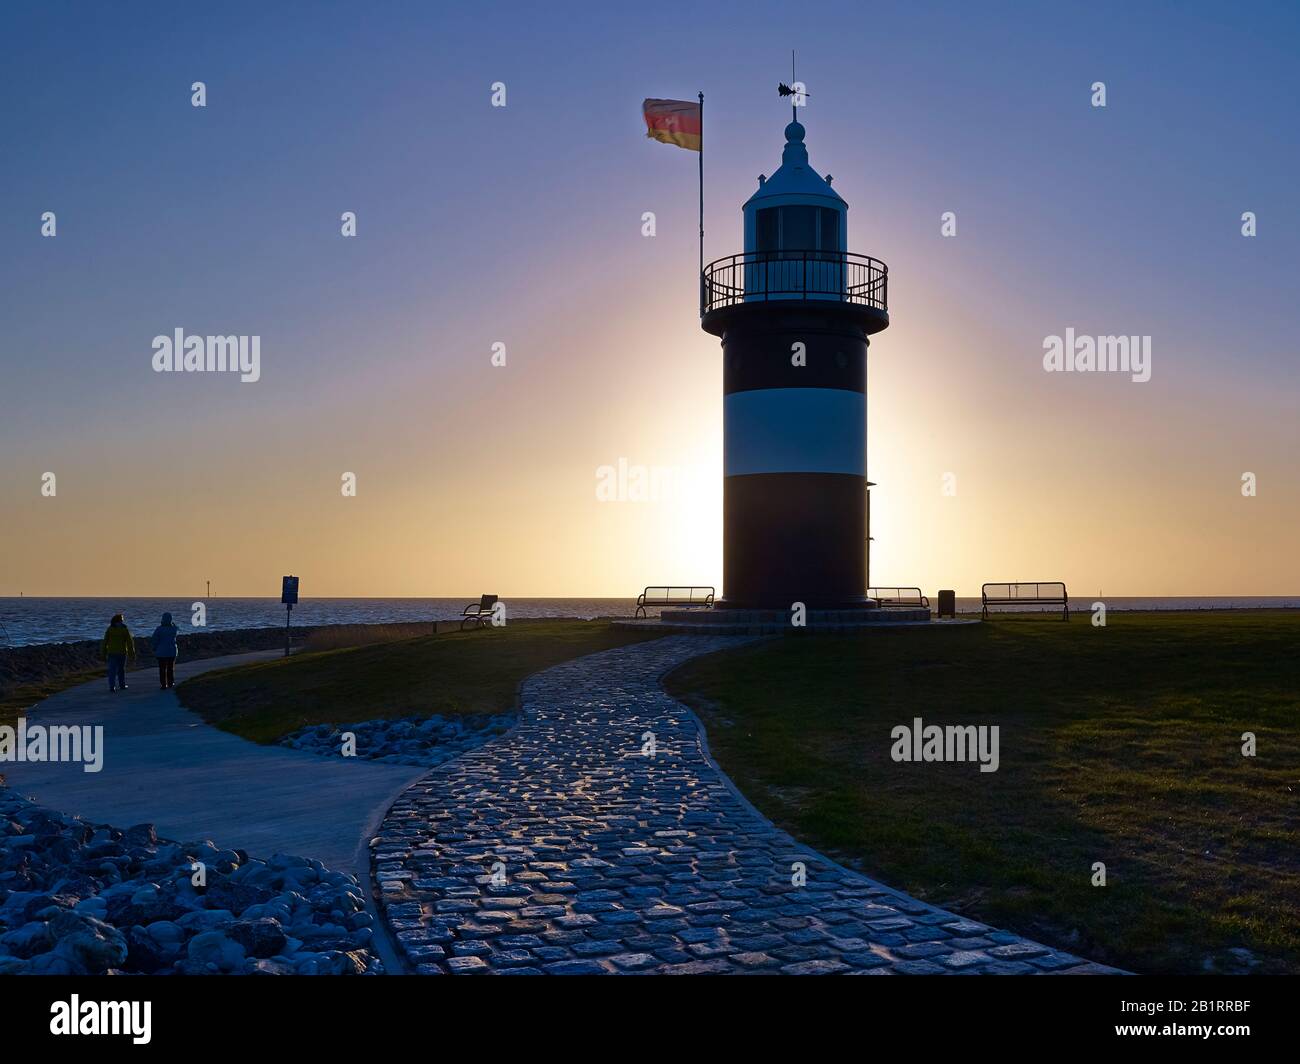 Lighthouse 'Kleiner Preusse' in the port of Wremen, Wurster coast, Cuxhaven district, Lower Saxony, Germany, Stock Photo